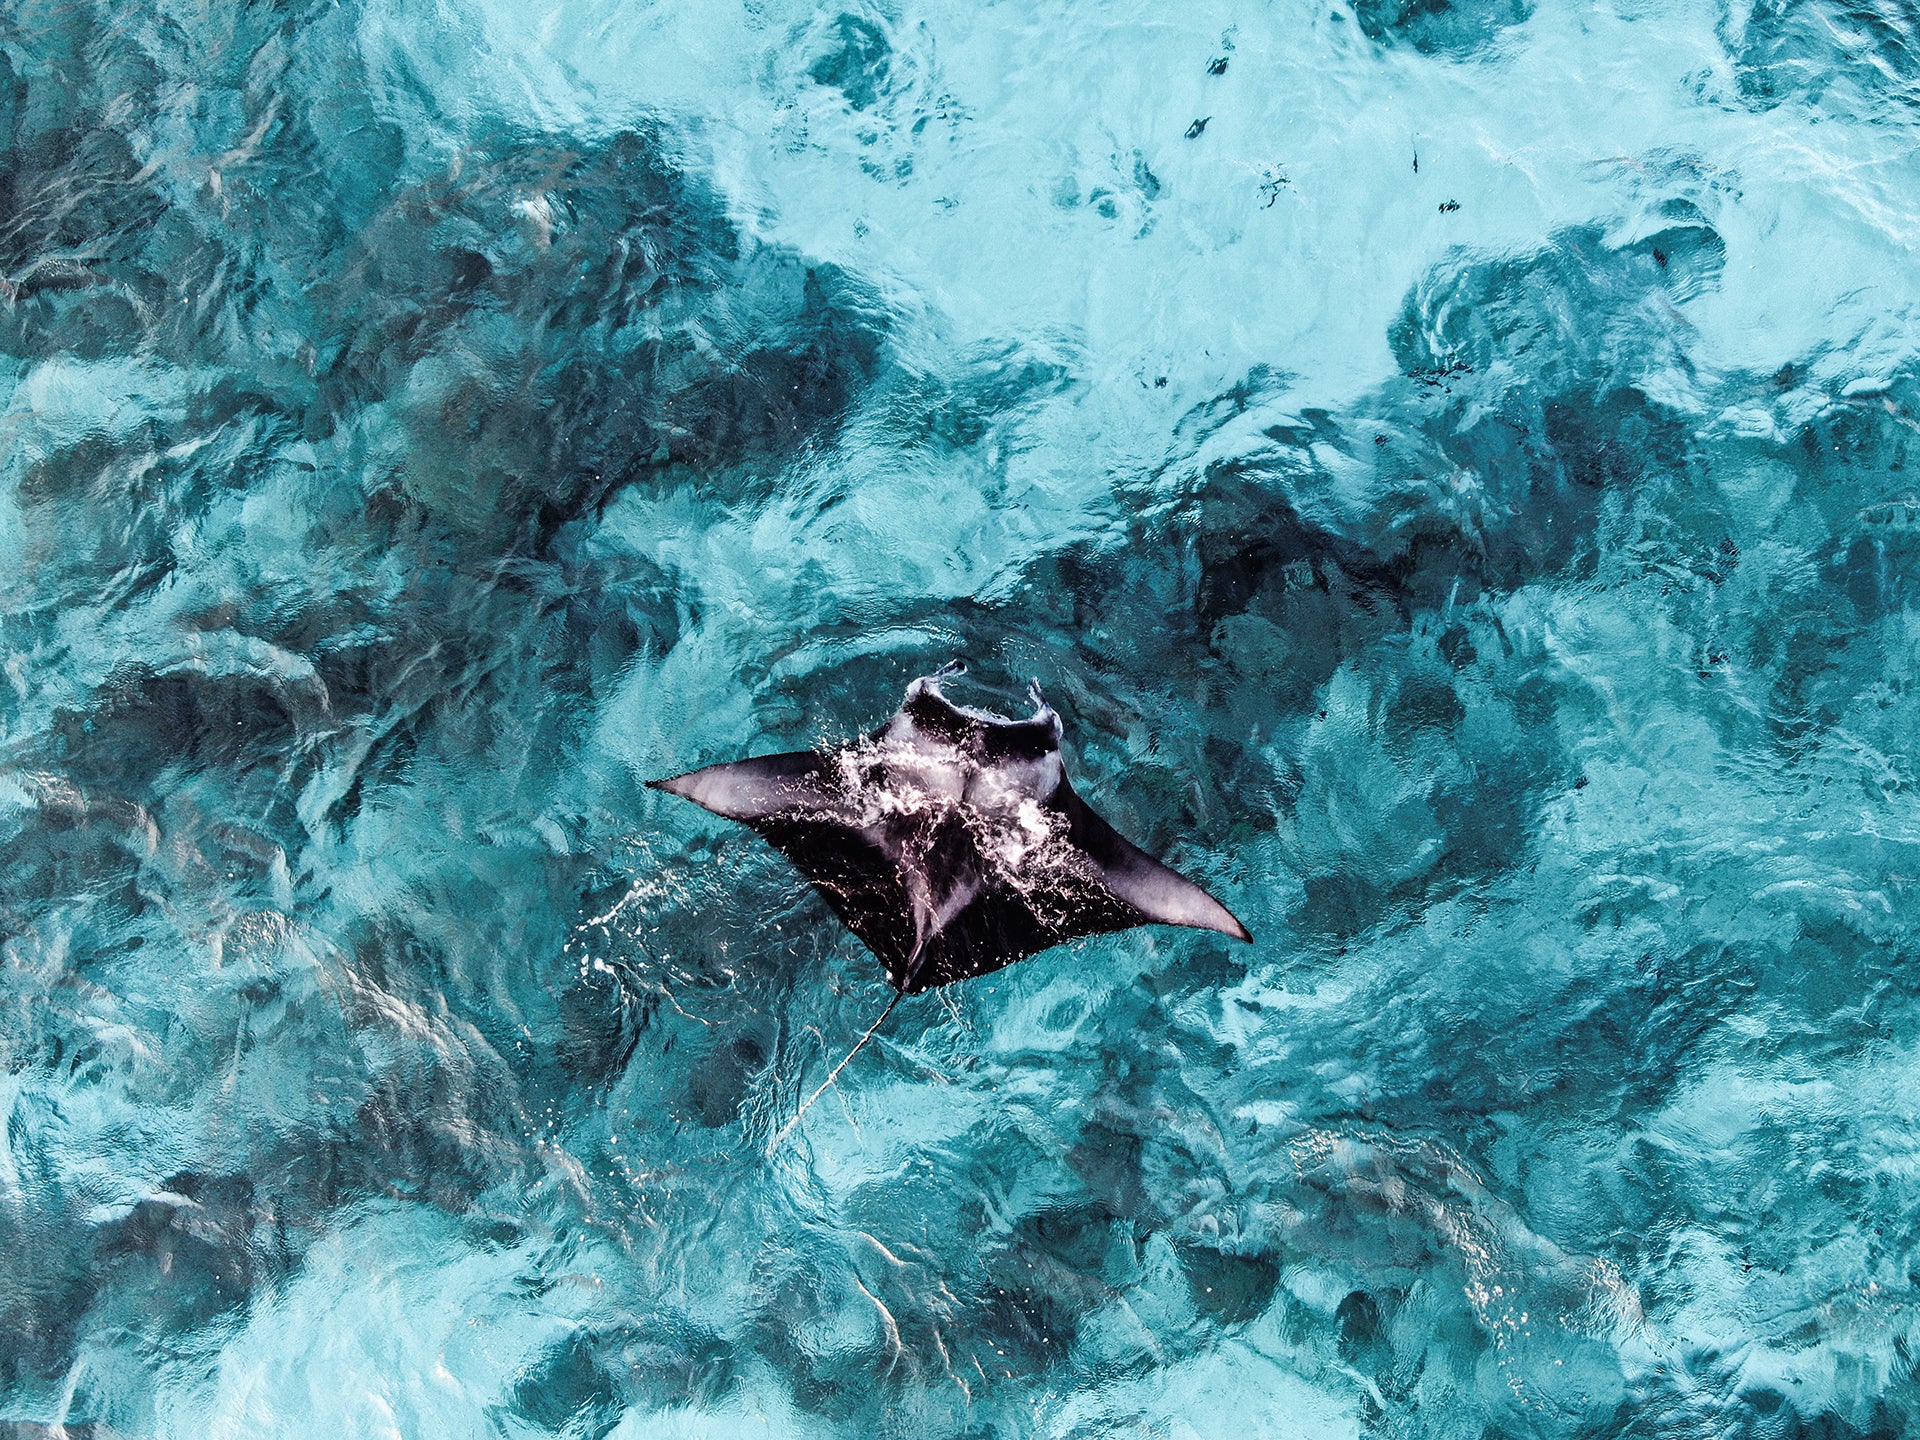 10 COOL FACTS ABOUT MANTAS